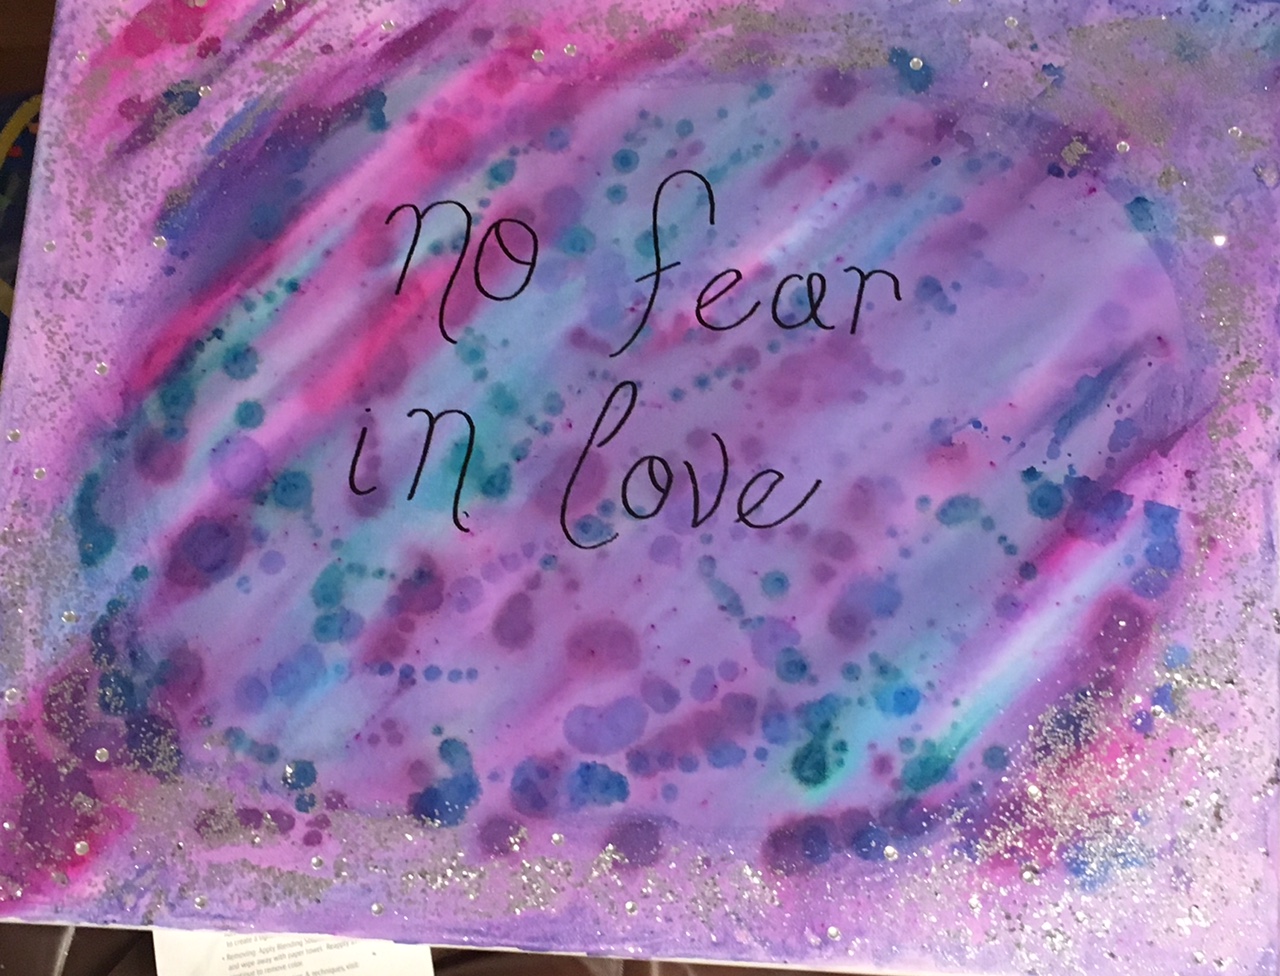 "There  is no fear in love, for perfect love casts out all fear." -1 John 4:18